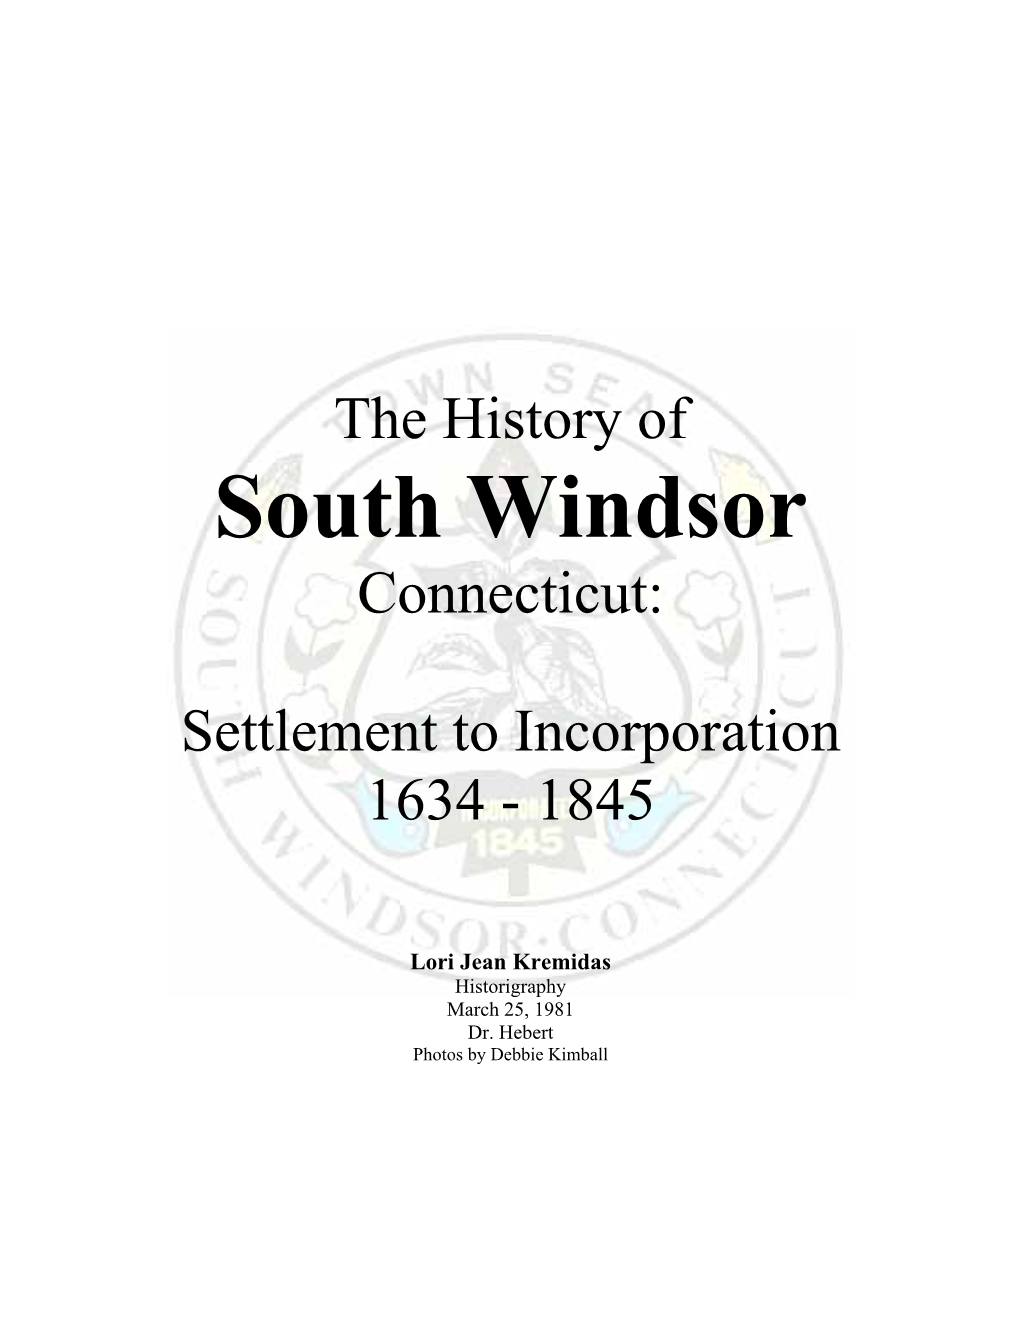 The History of South Windsor Connecticut